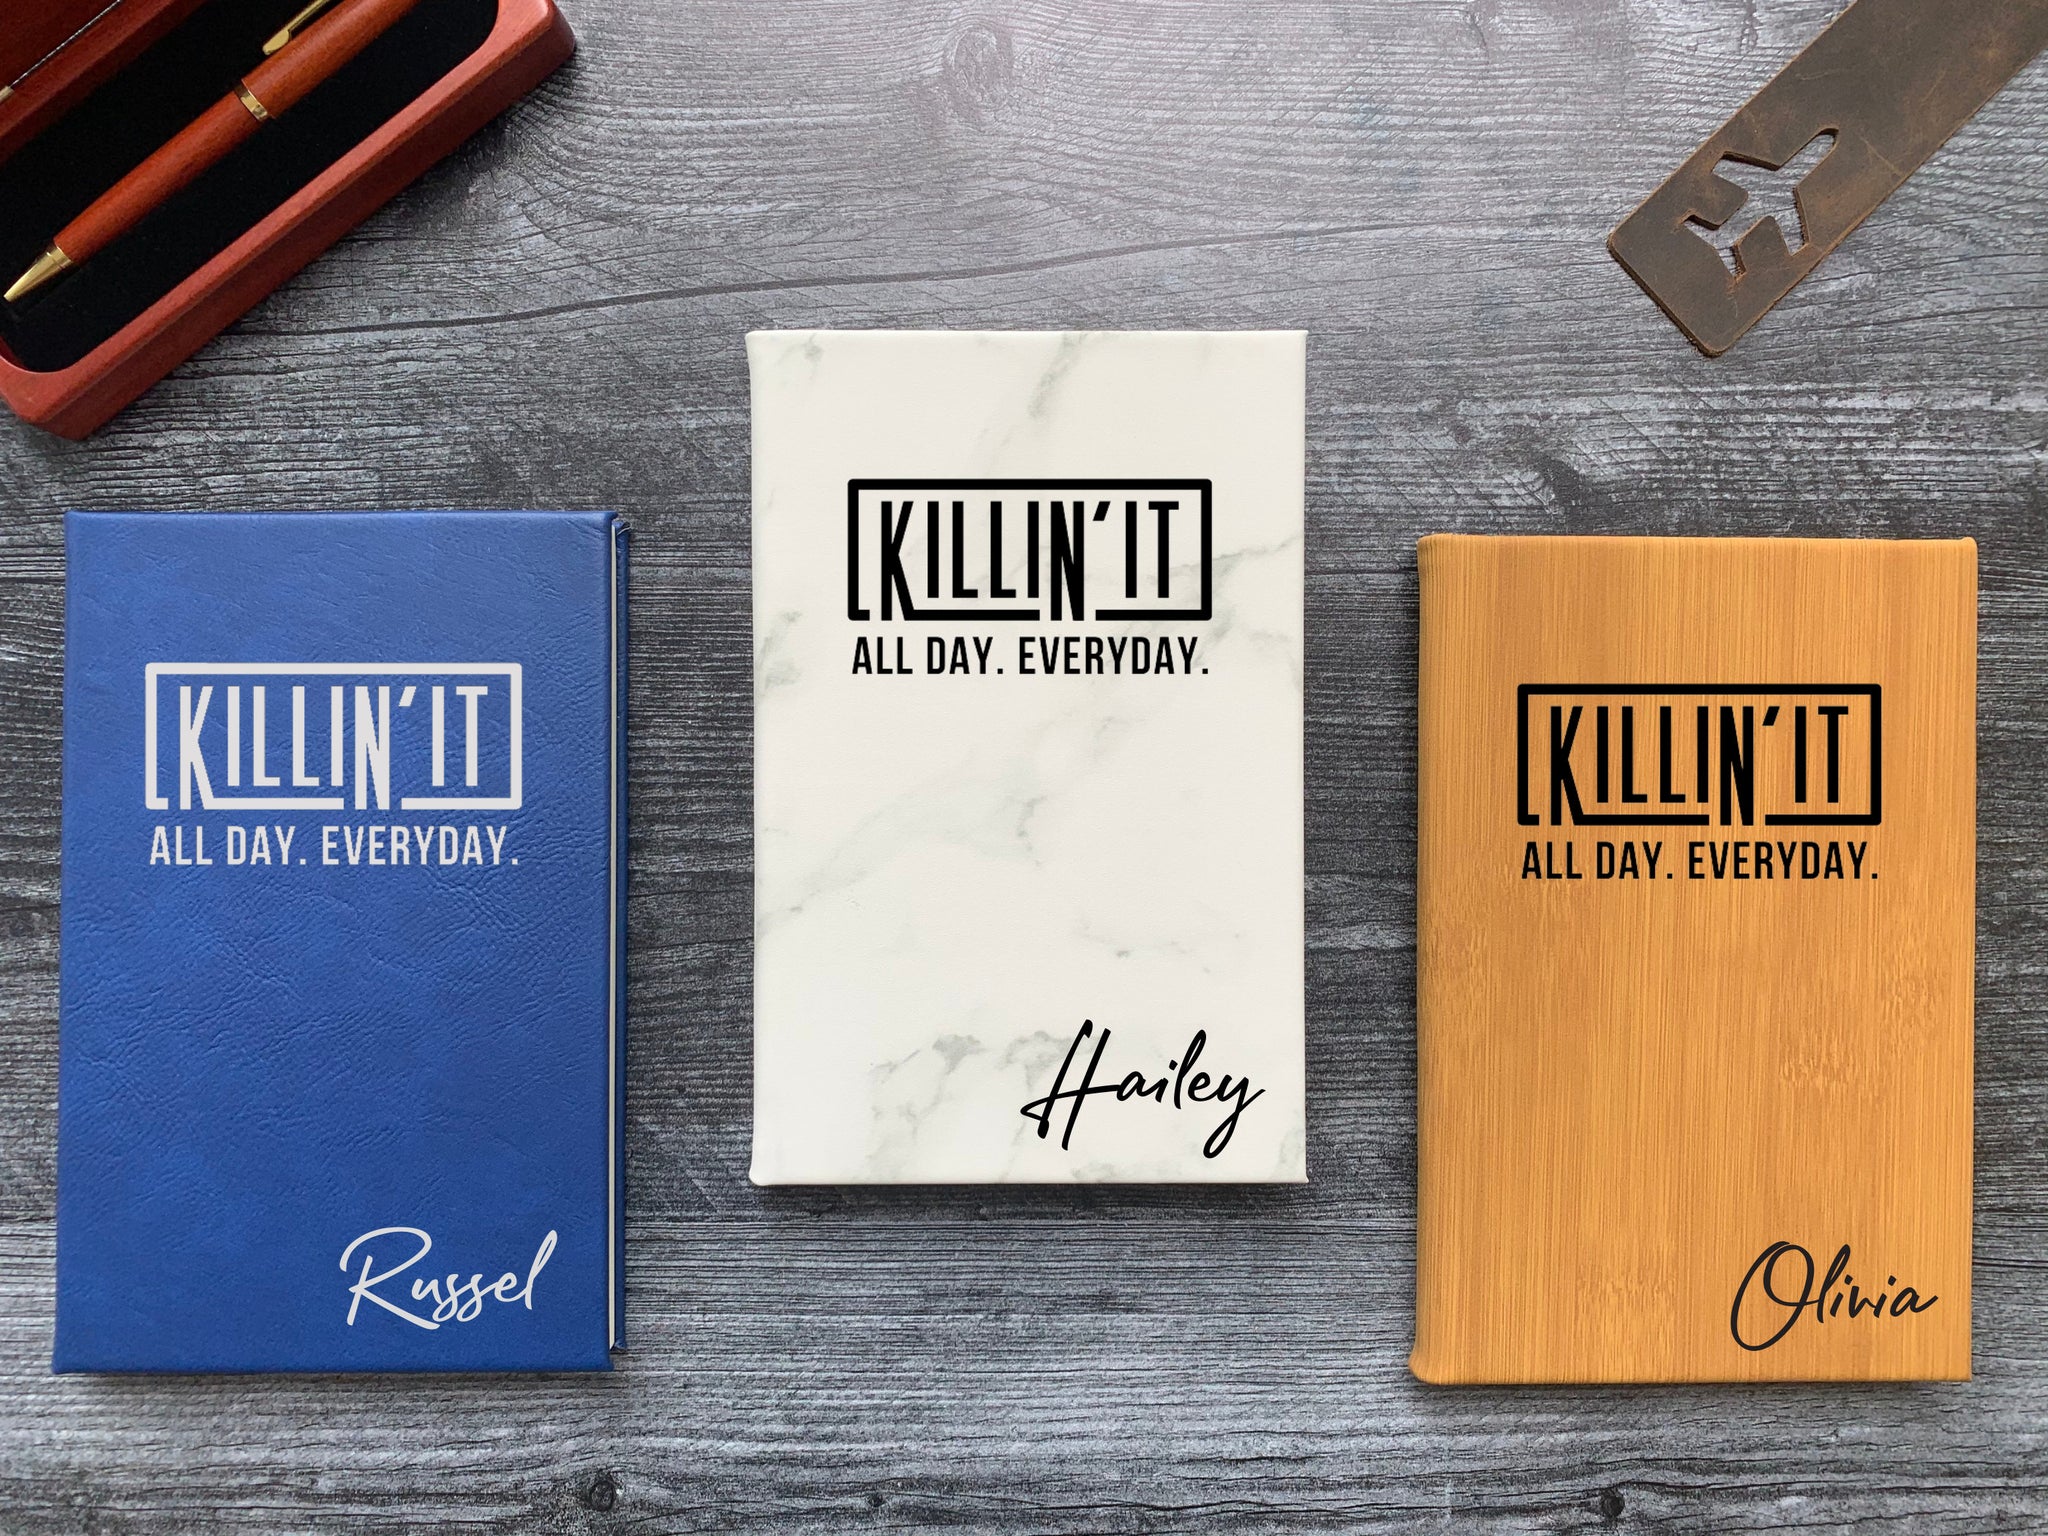 Personalized Journal, Killin'it All Day Every Day, Gift for Entrepreneurs, Writing Notebook, Vegan Leather Journal